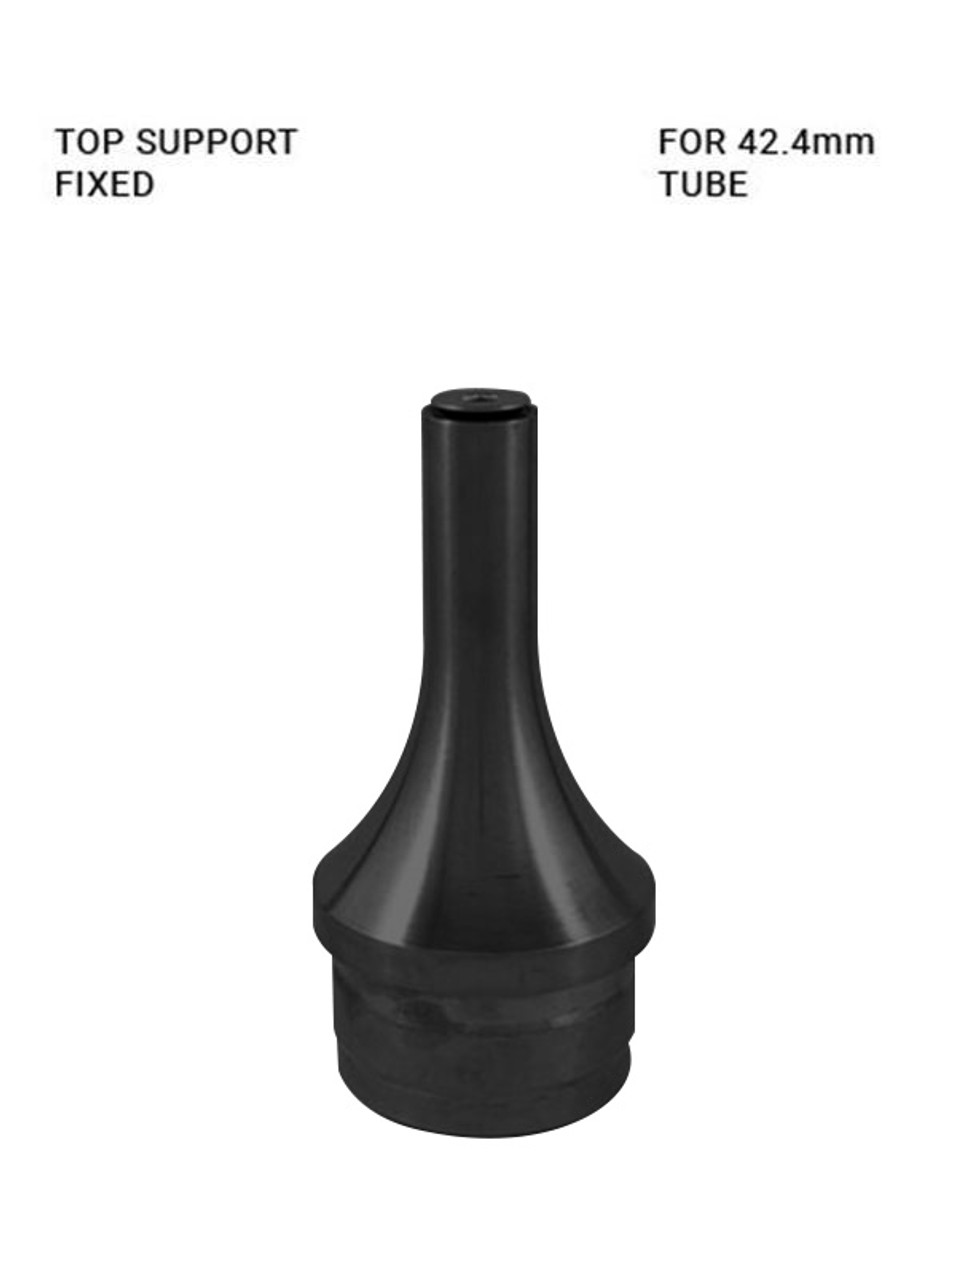 TS44404242LBL Tube support fixed for 42.4mm round tube